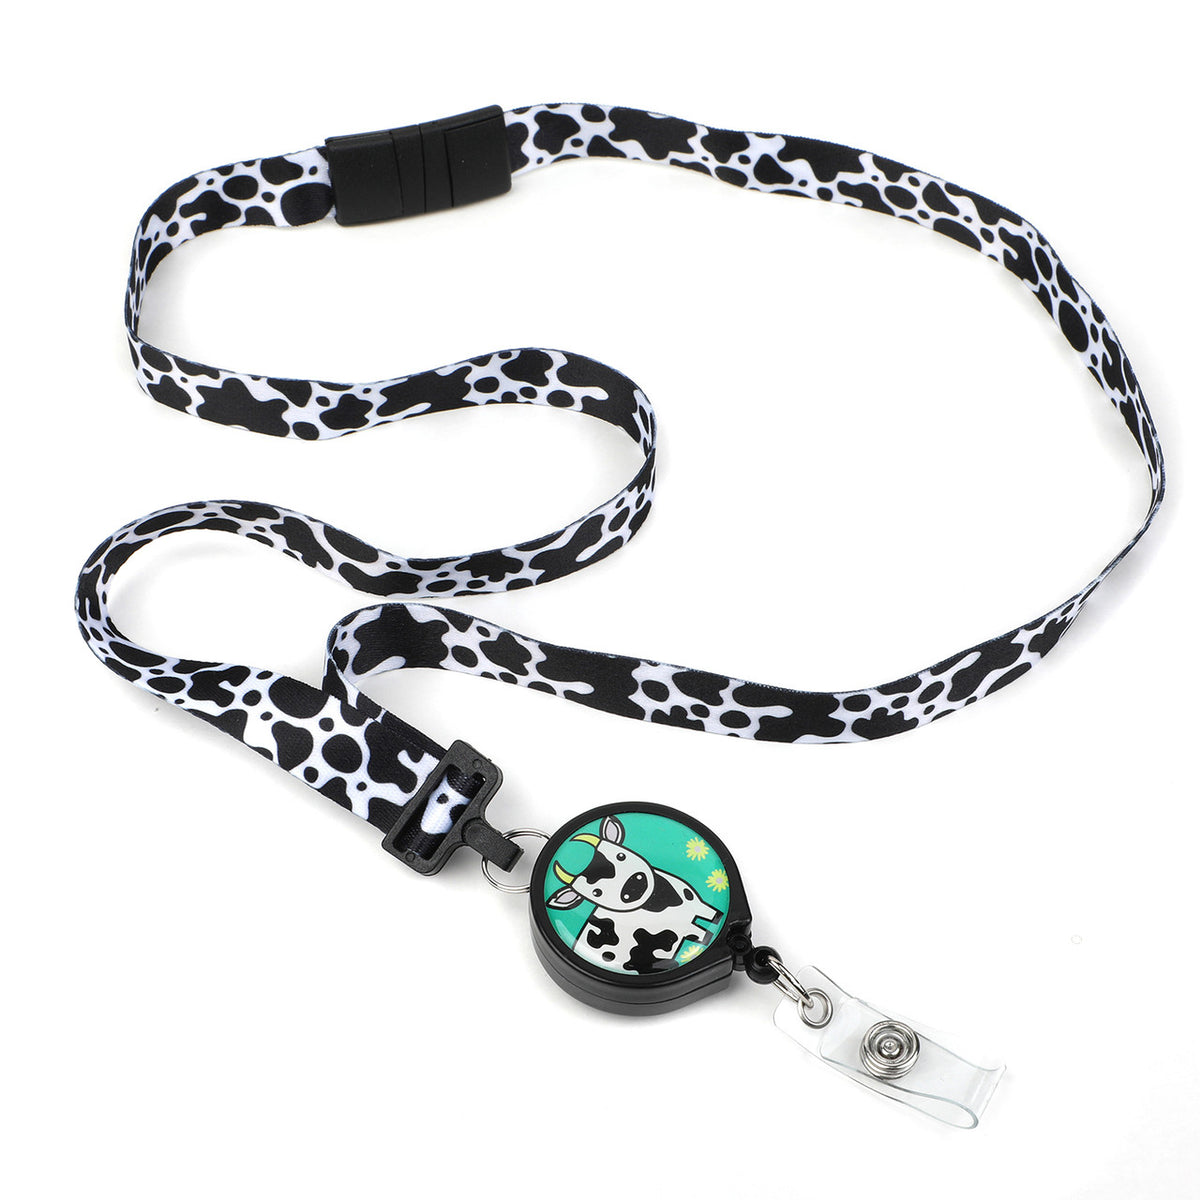 Spotty Cow Ribbon Lanyard with Reel